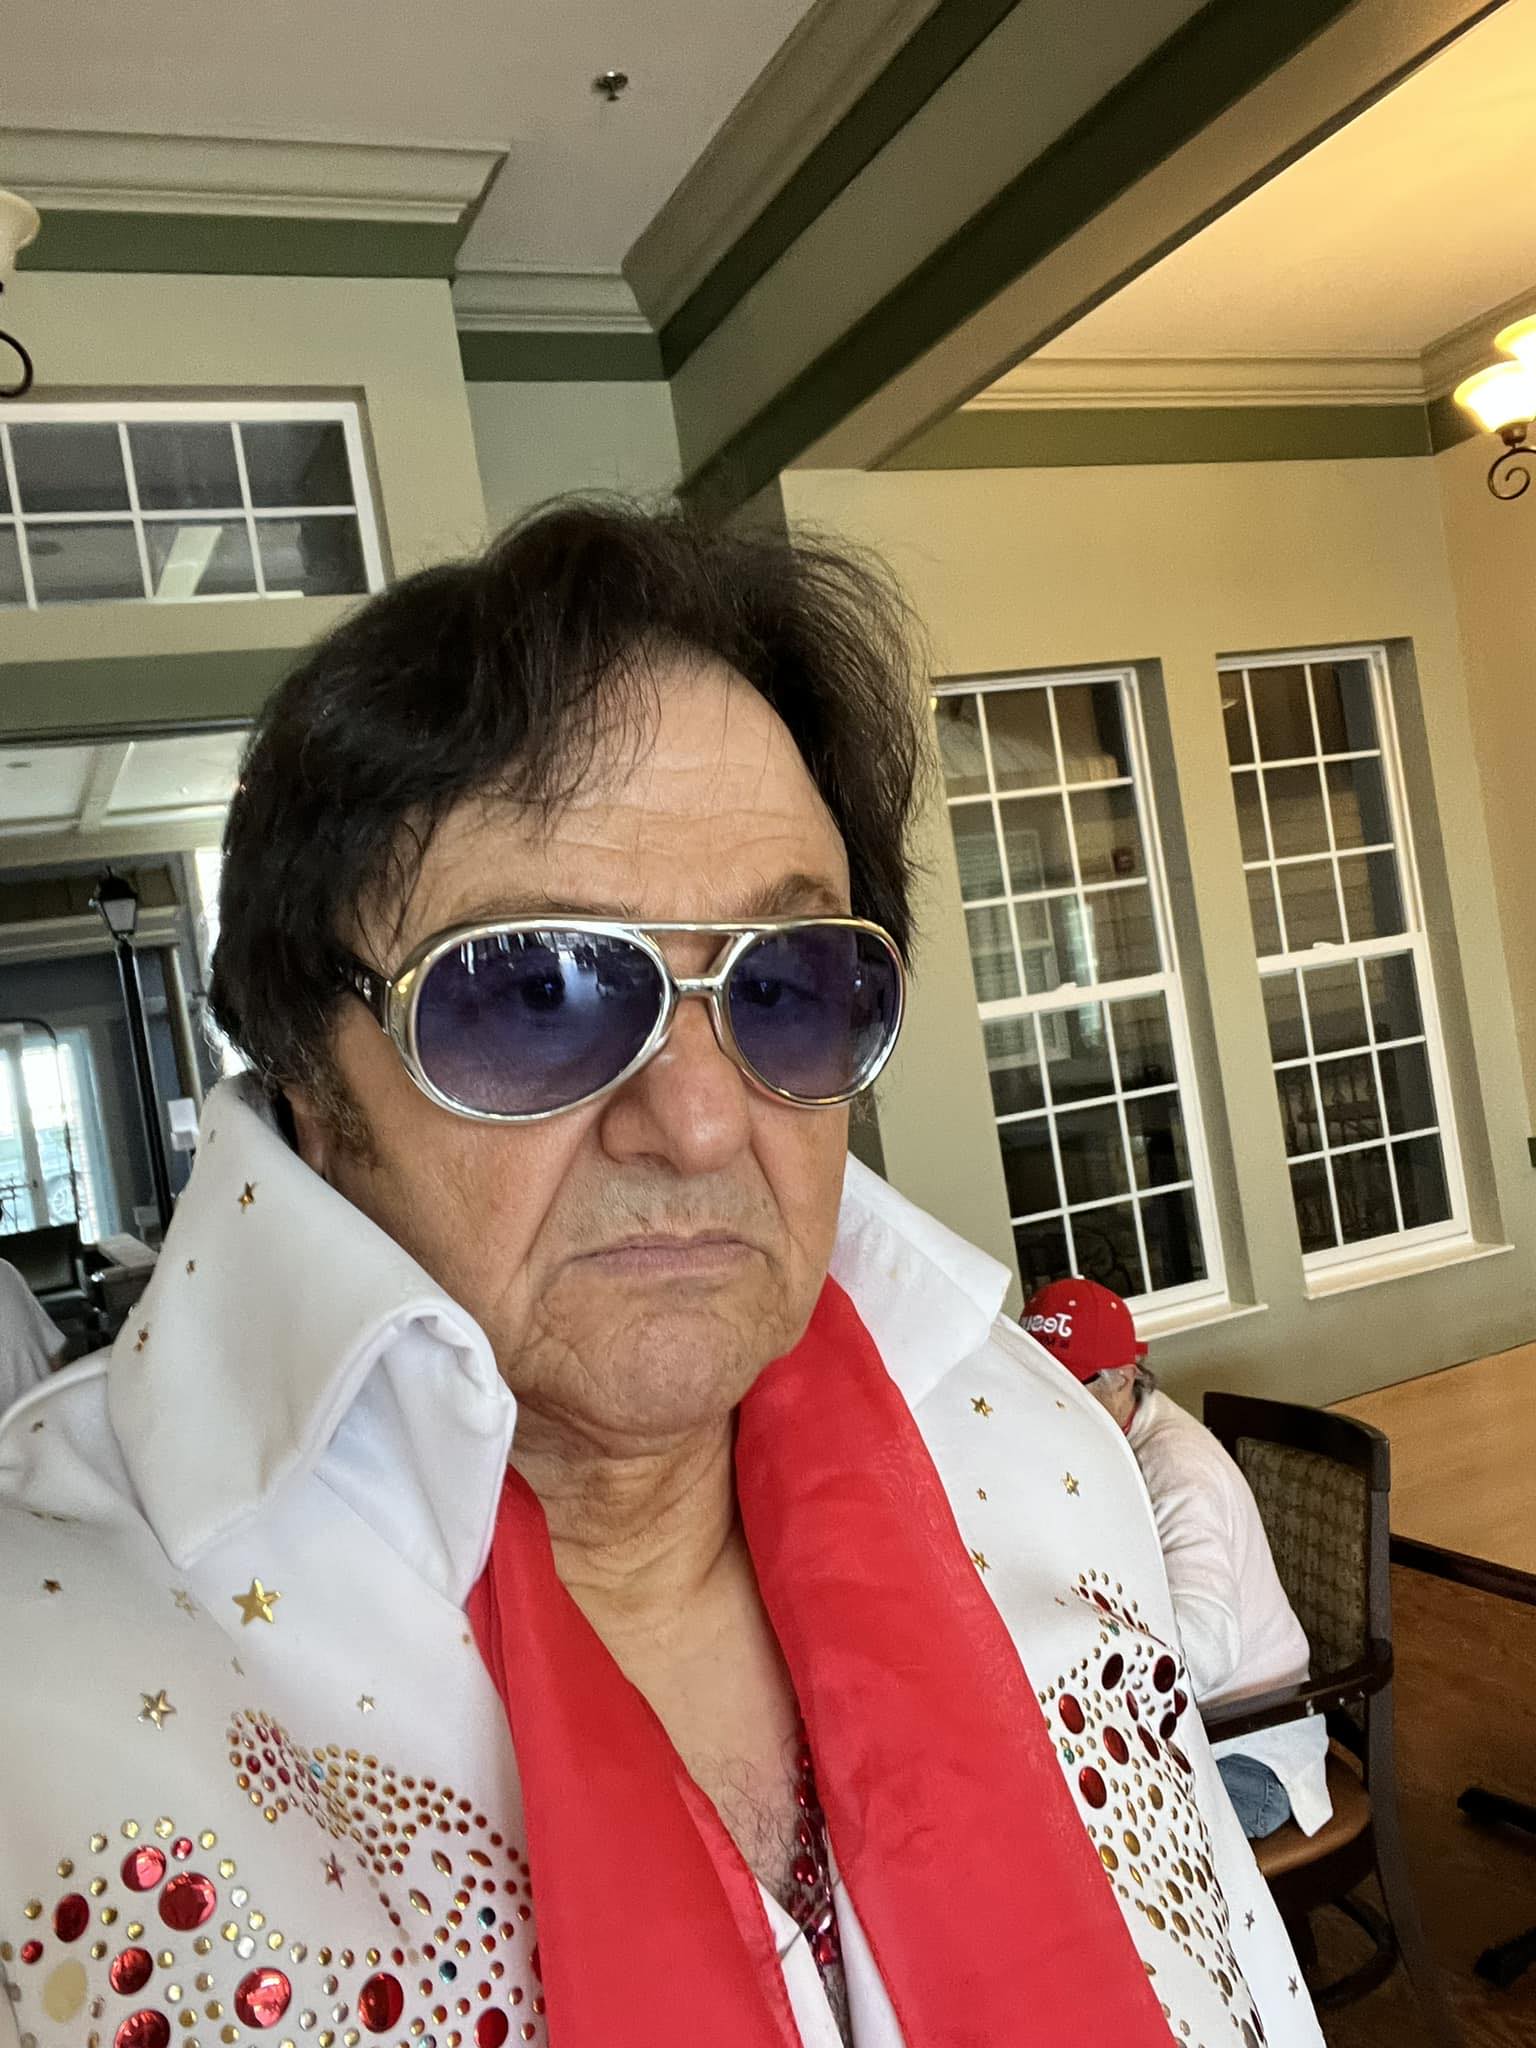 Paul Floriano doing an Elvis impersonation